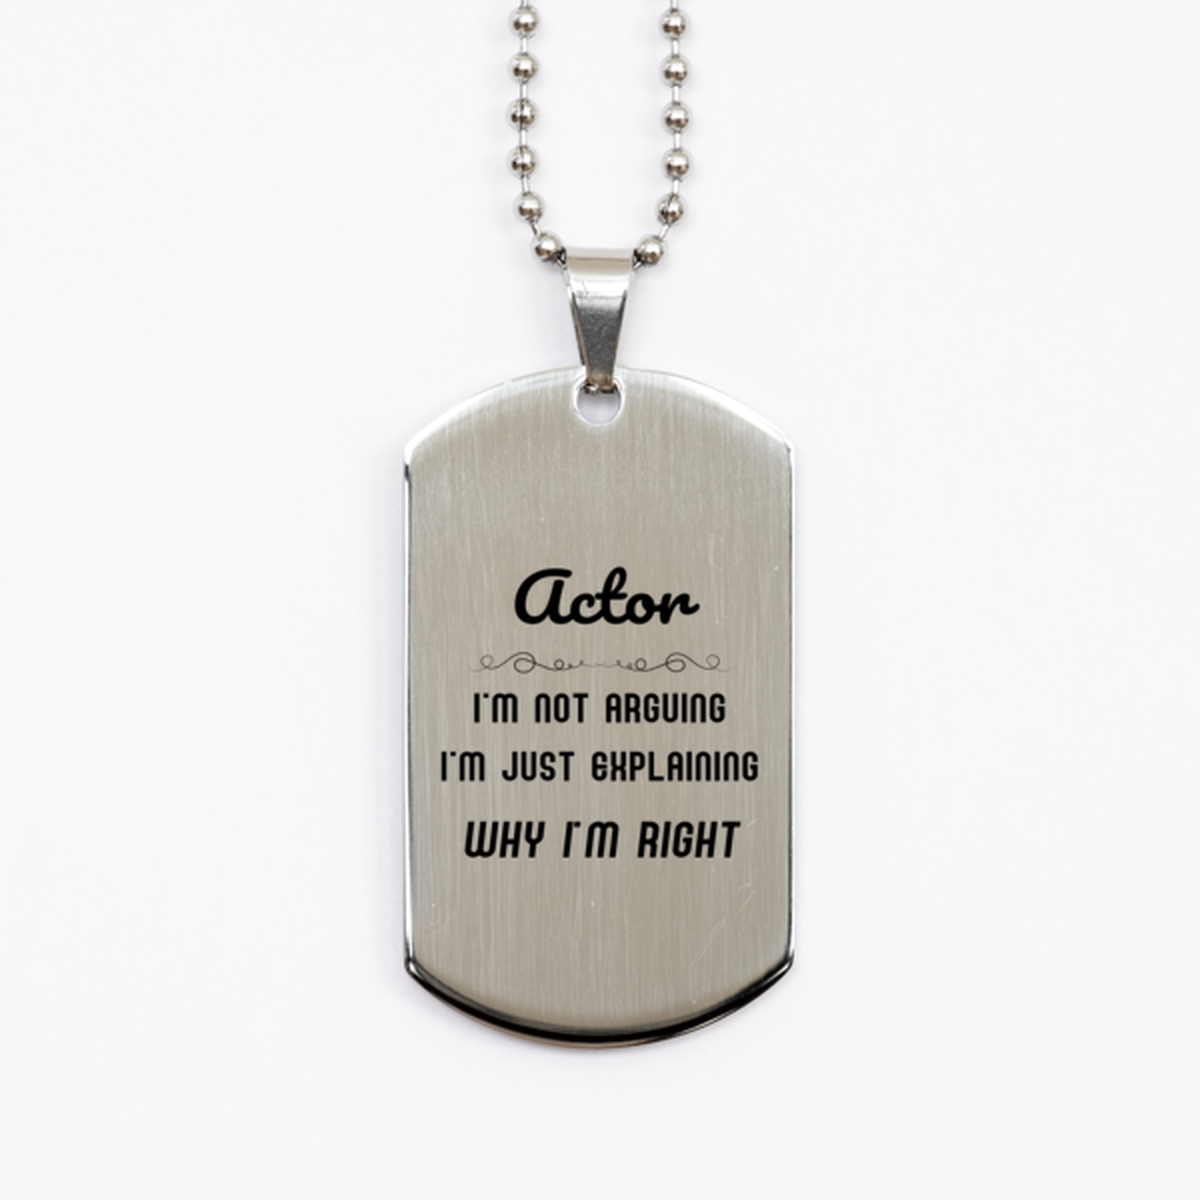 Actor I'm not Arguing. I'm Just Explaining Why I'm RIGHT Silver Dog Tag, Funny Saying Quote Actor Gifts For Actor Graduation Birthday Christmas Gifts for Men Women Coworker